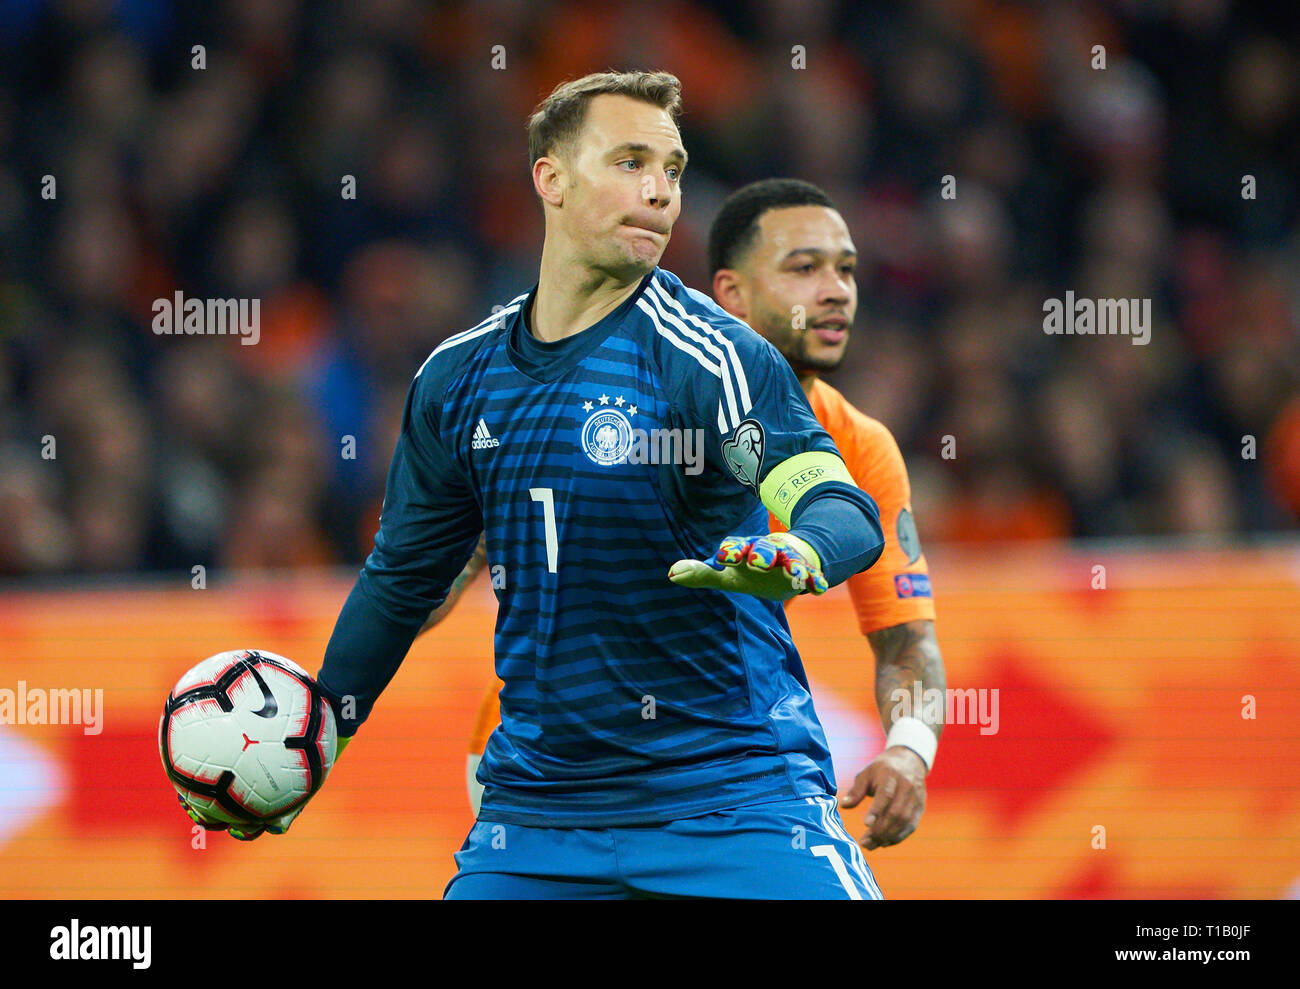 Amsterdam, Netherlands. 24th Mar, 2019. Manuel NEUER, DFB 1 goalkeeper, fights for the ball, catches, catch, hold, defend, action, frame, cut out, reaction, fist, Memphis DEPAY, NL 10 NETHERLANDS - GERMANY 2-3 Important: DFB regulations prohibit any use of photographs as image sequences and/or quasi-video. Qualification for European Championships, EM Quali, 2020 Season 2018/2019, March 24, 2019 in Amsterdam, Netherlands. Credit: Peter Schatz/Alamy Live News Stock Photo